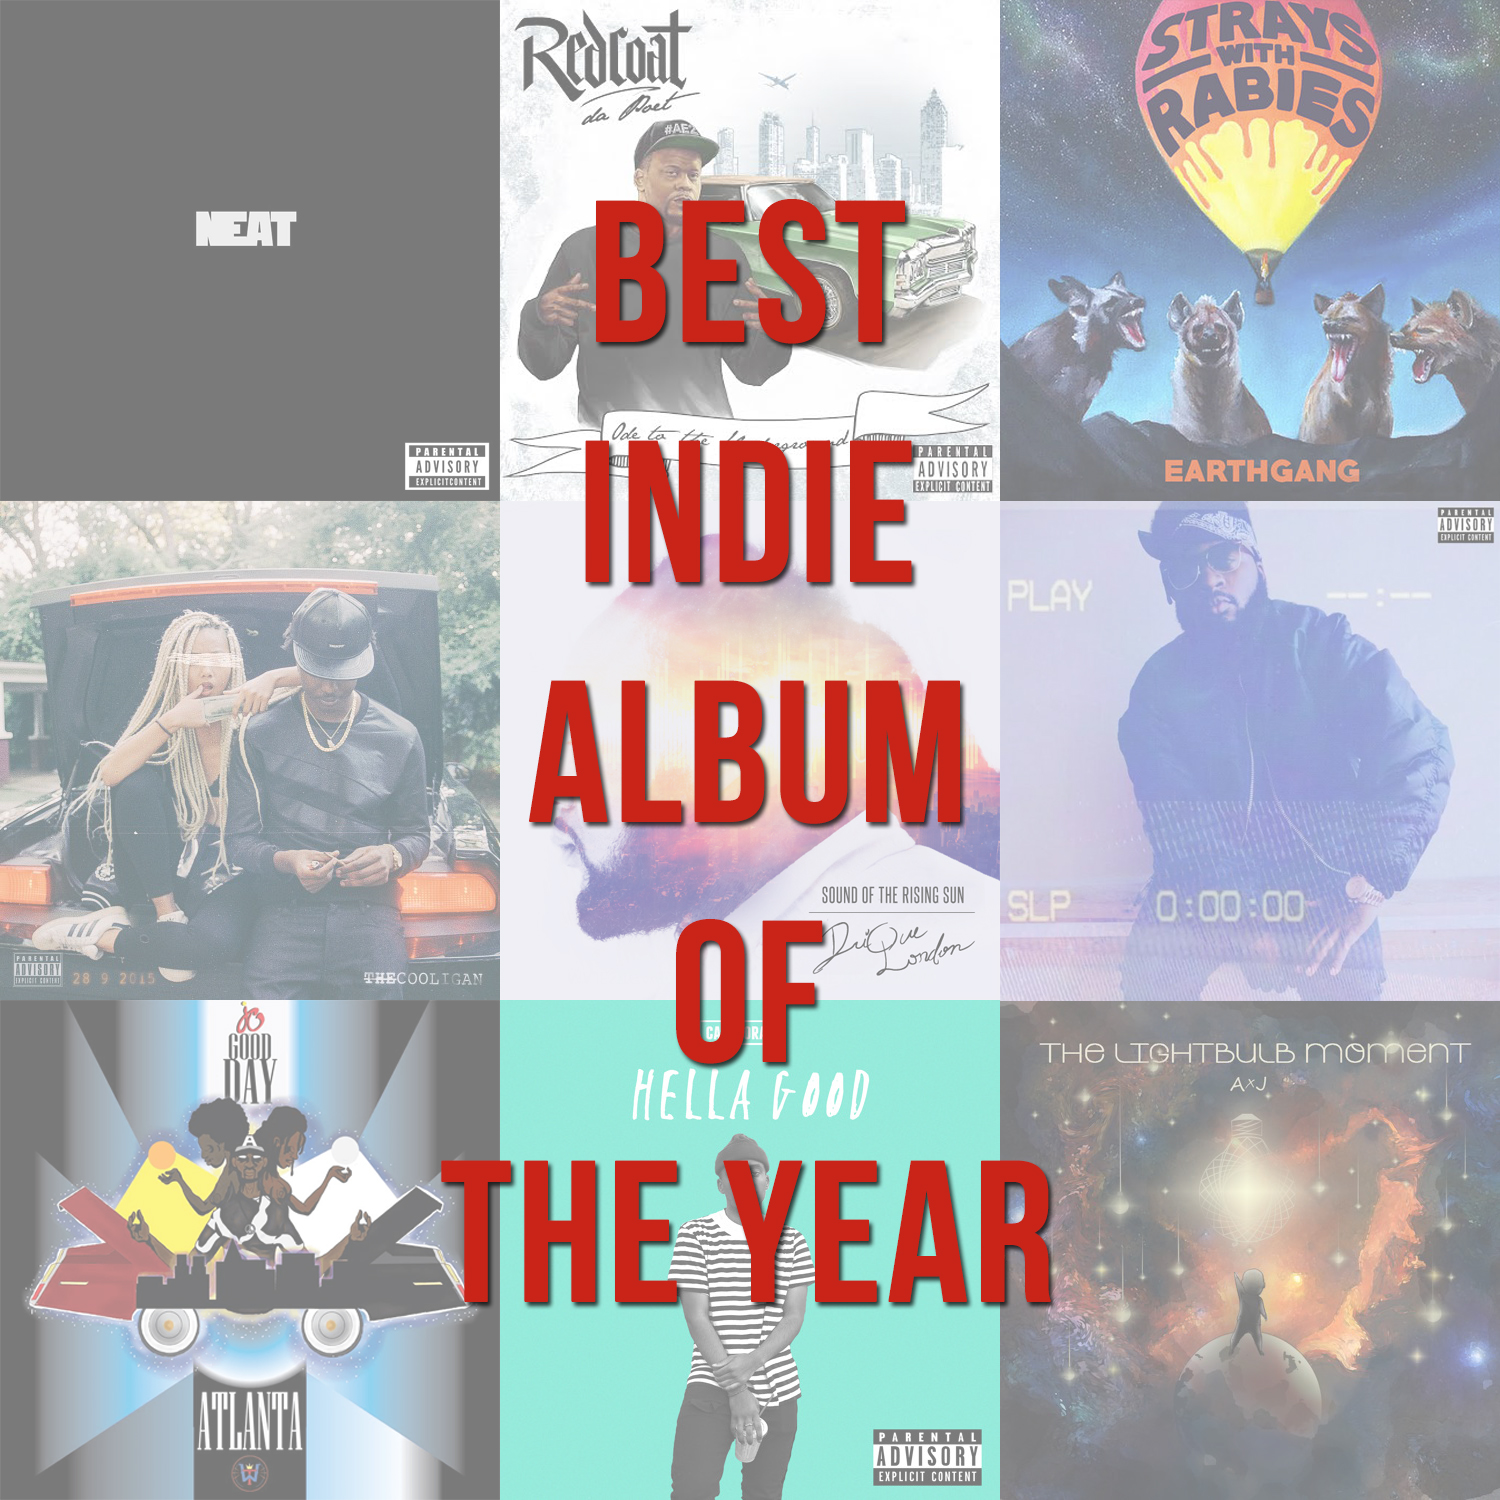 Vote For Best Indie Album Of The Year and